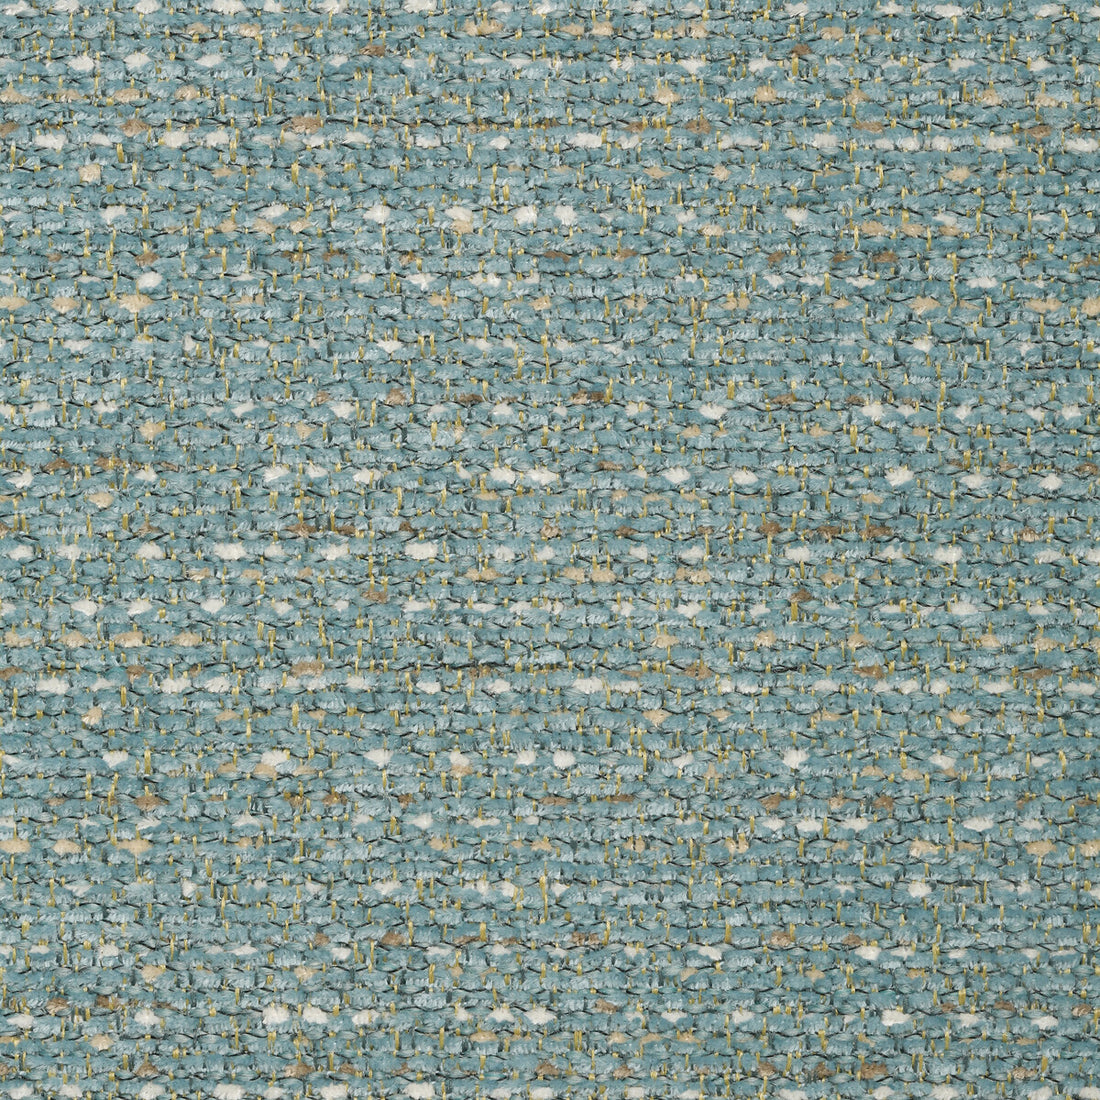 Kravet Smart fabric in 35117-135 color - pattern 35117.135.0 - by Kravet Smart in the Performance Crypton Home collection